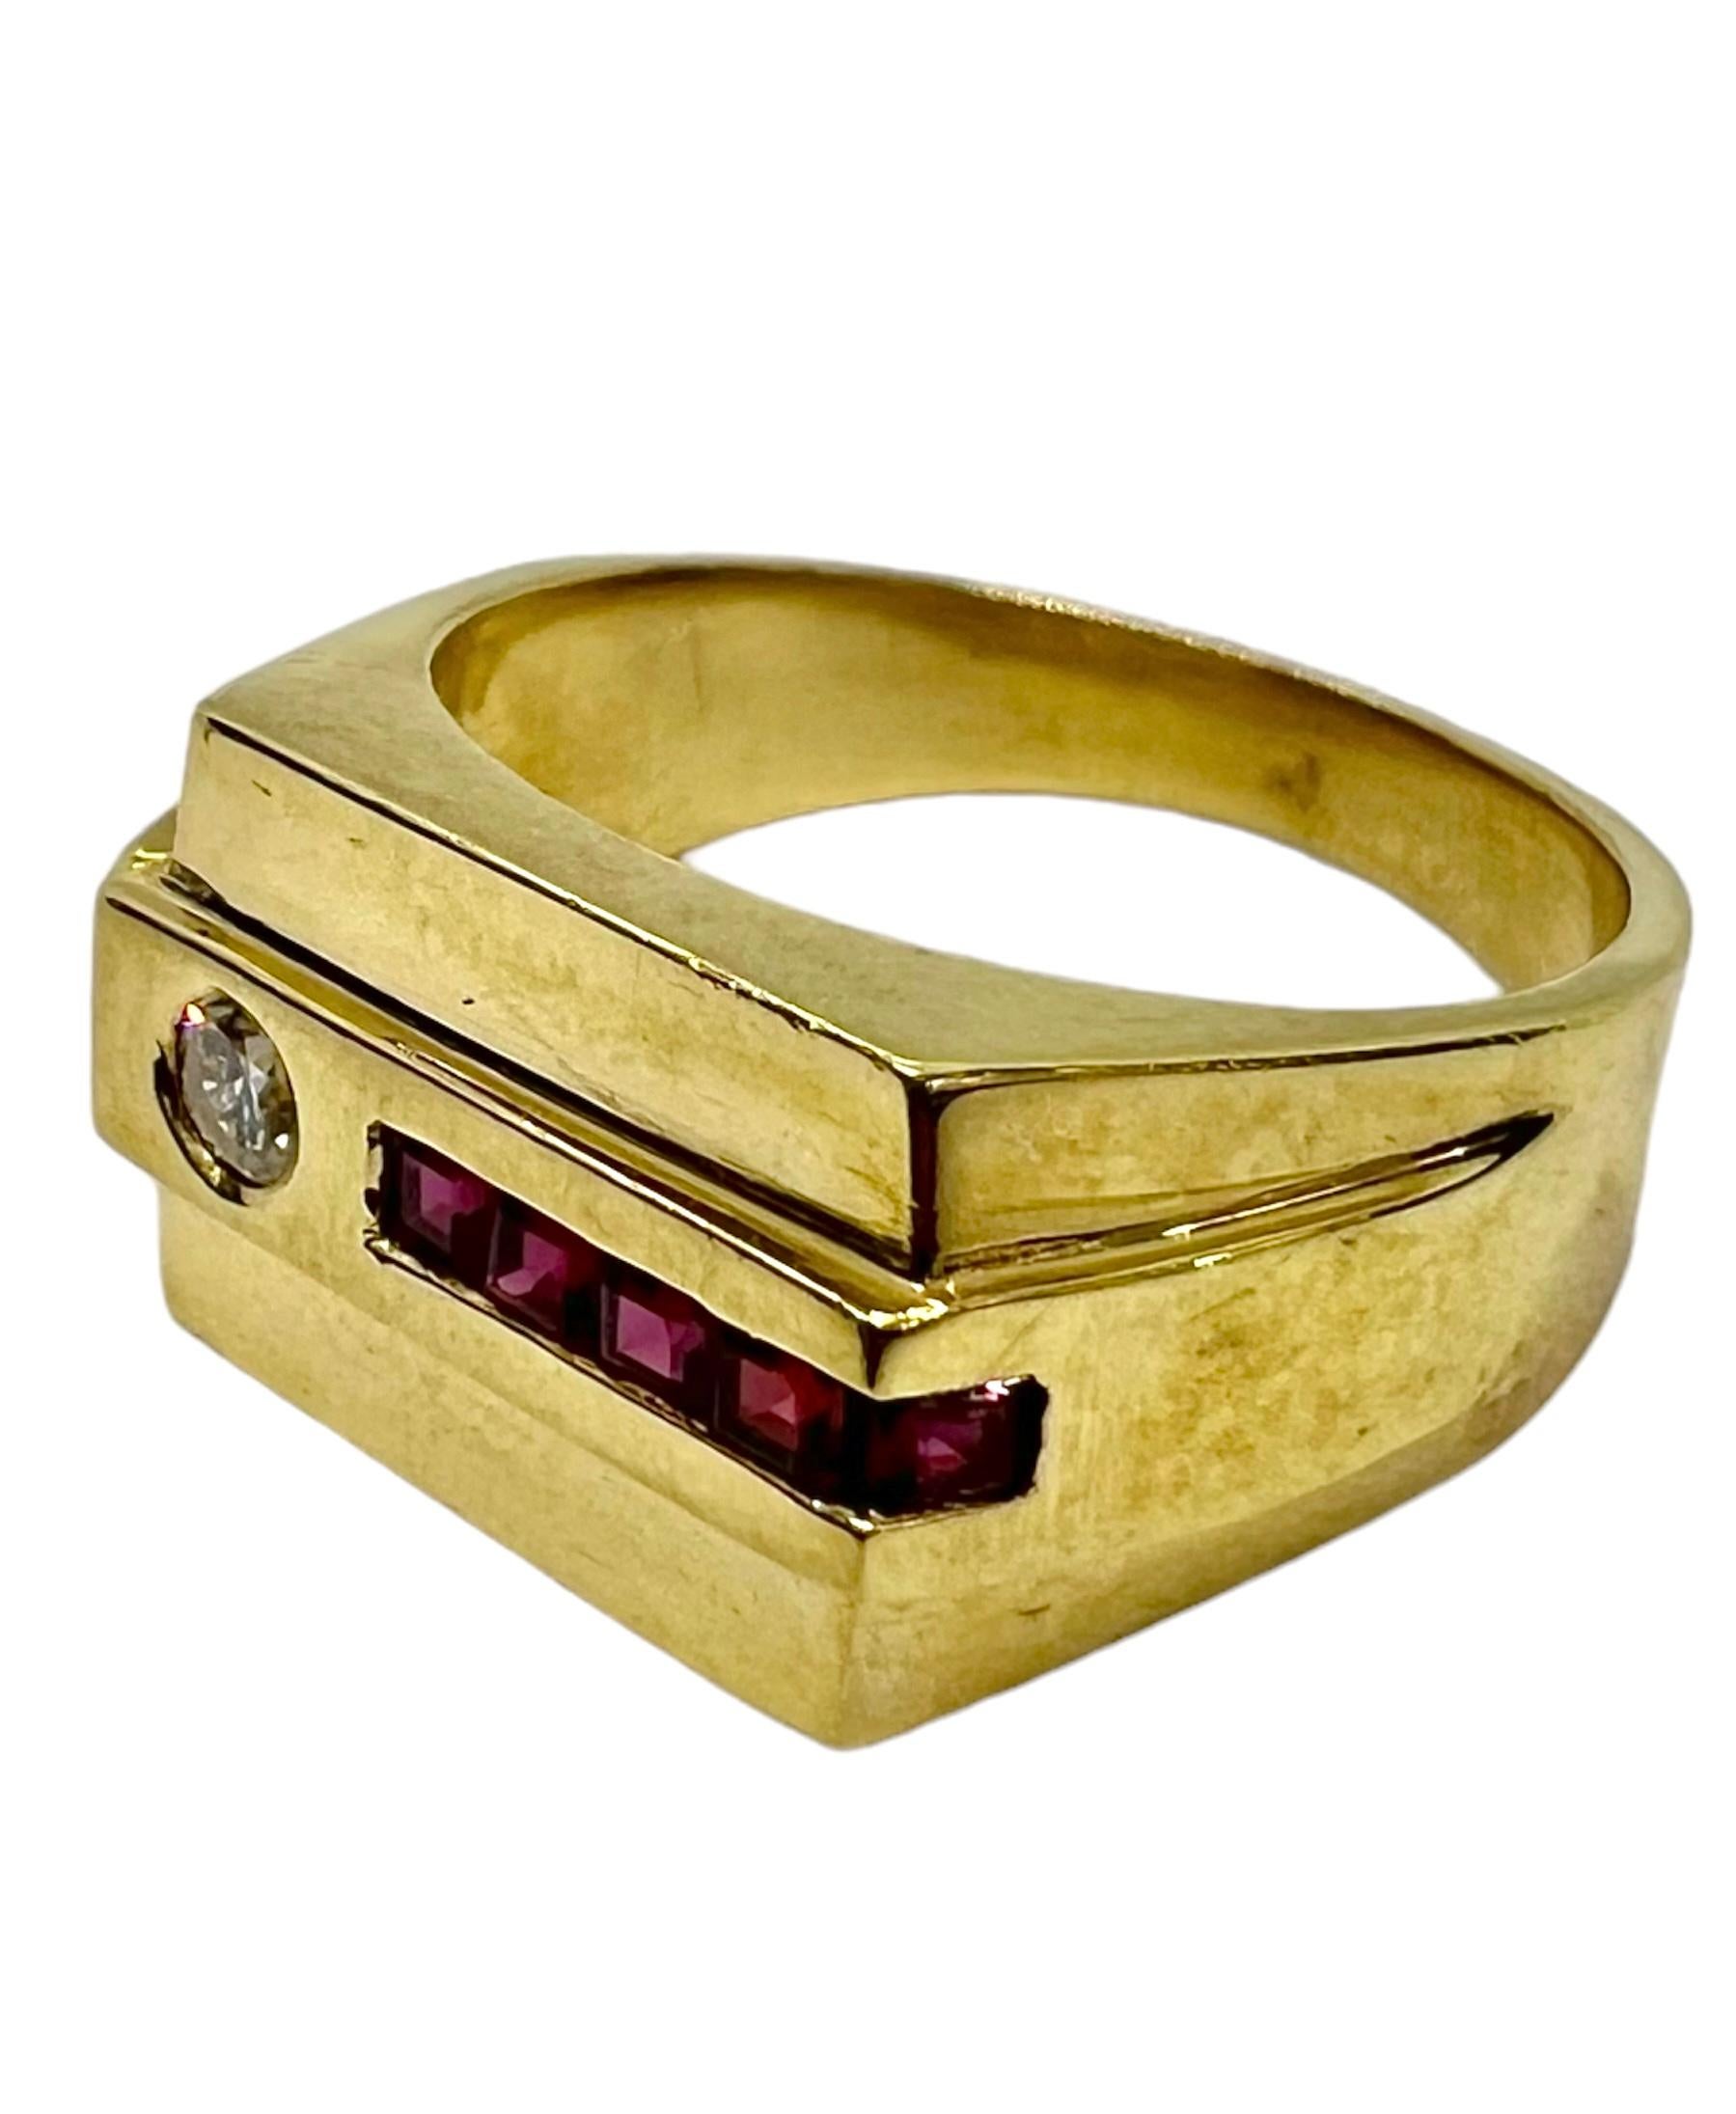 Yellow gold ring with square cut rubies and round diamonds.

Sophia D by Joseph Dardashti LTD has been known worldwide for 35 years and are inspired by classic Art Deco design that merges with modern manufacturing techniques. 